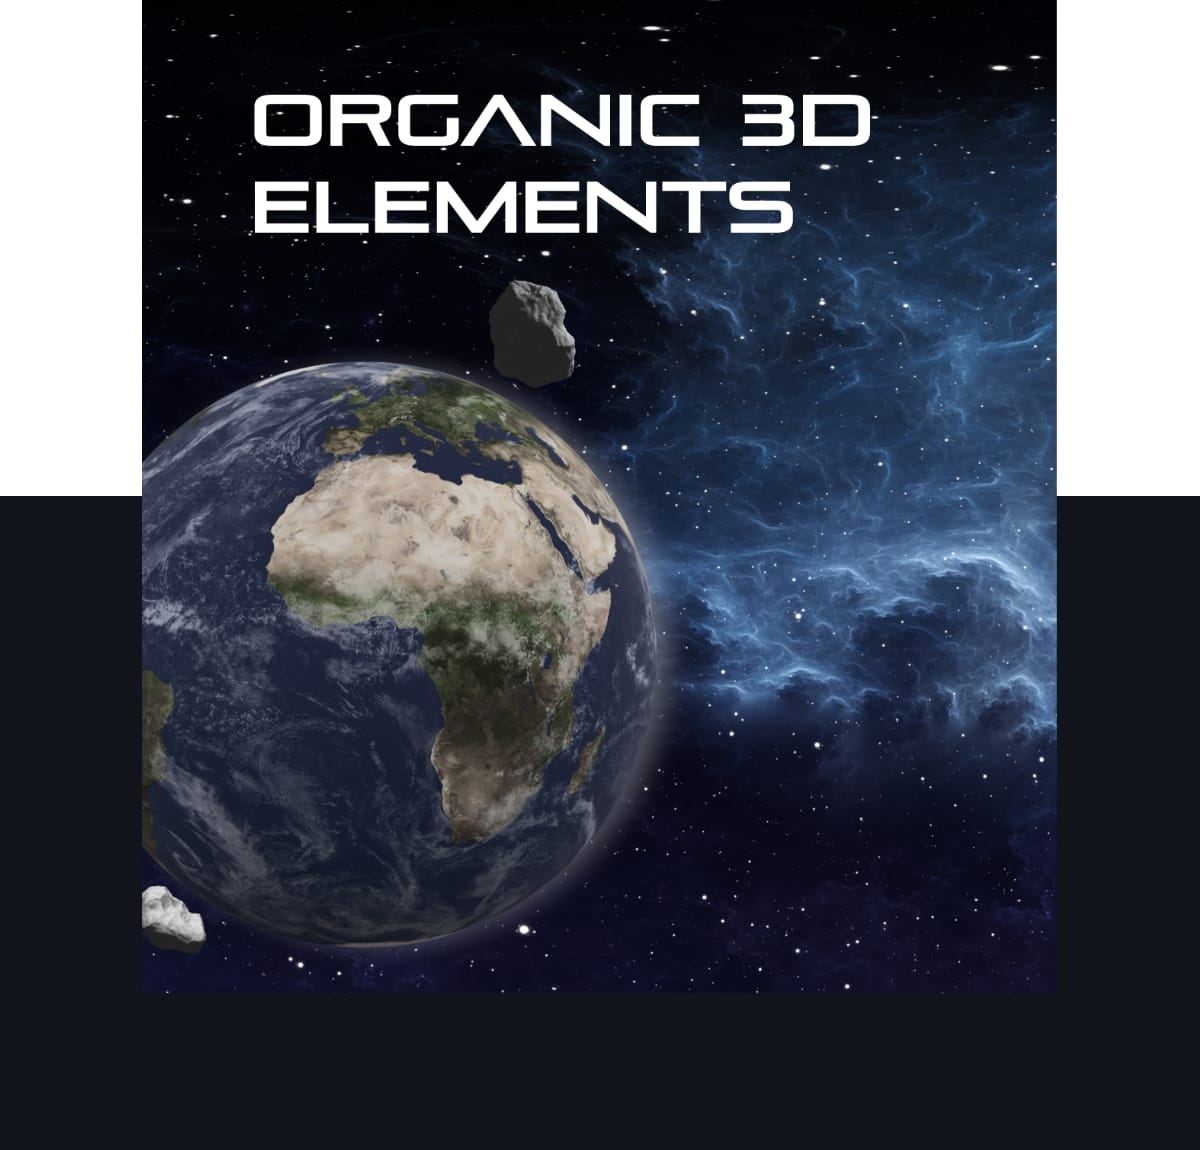 Check out our last month's edition on Organic 3D elements